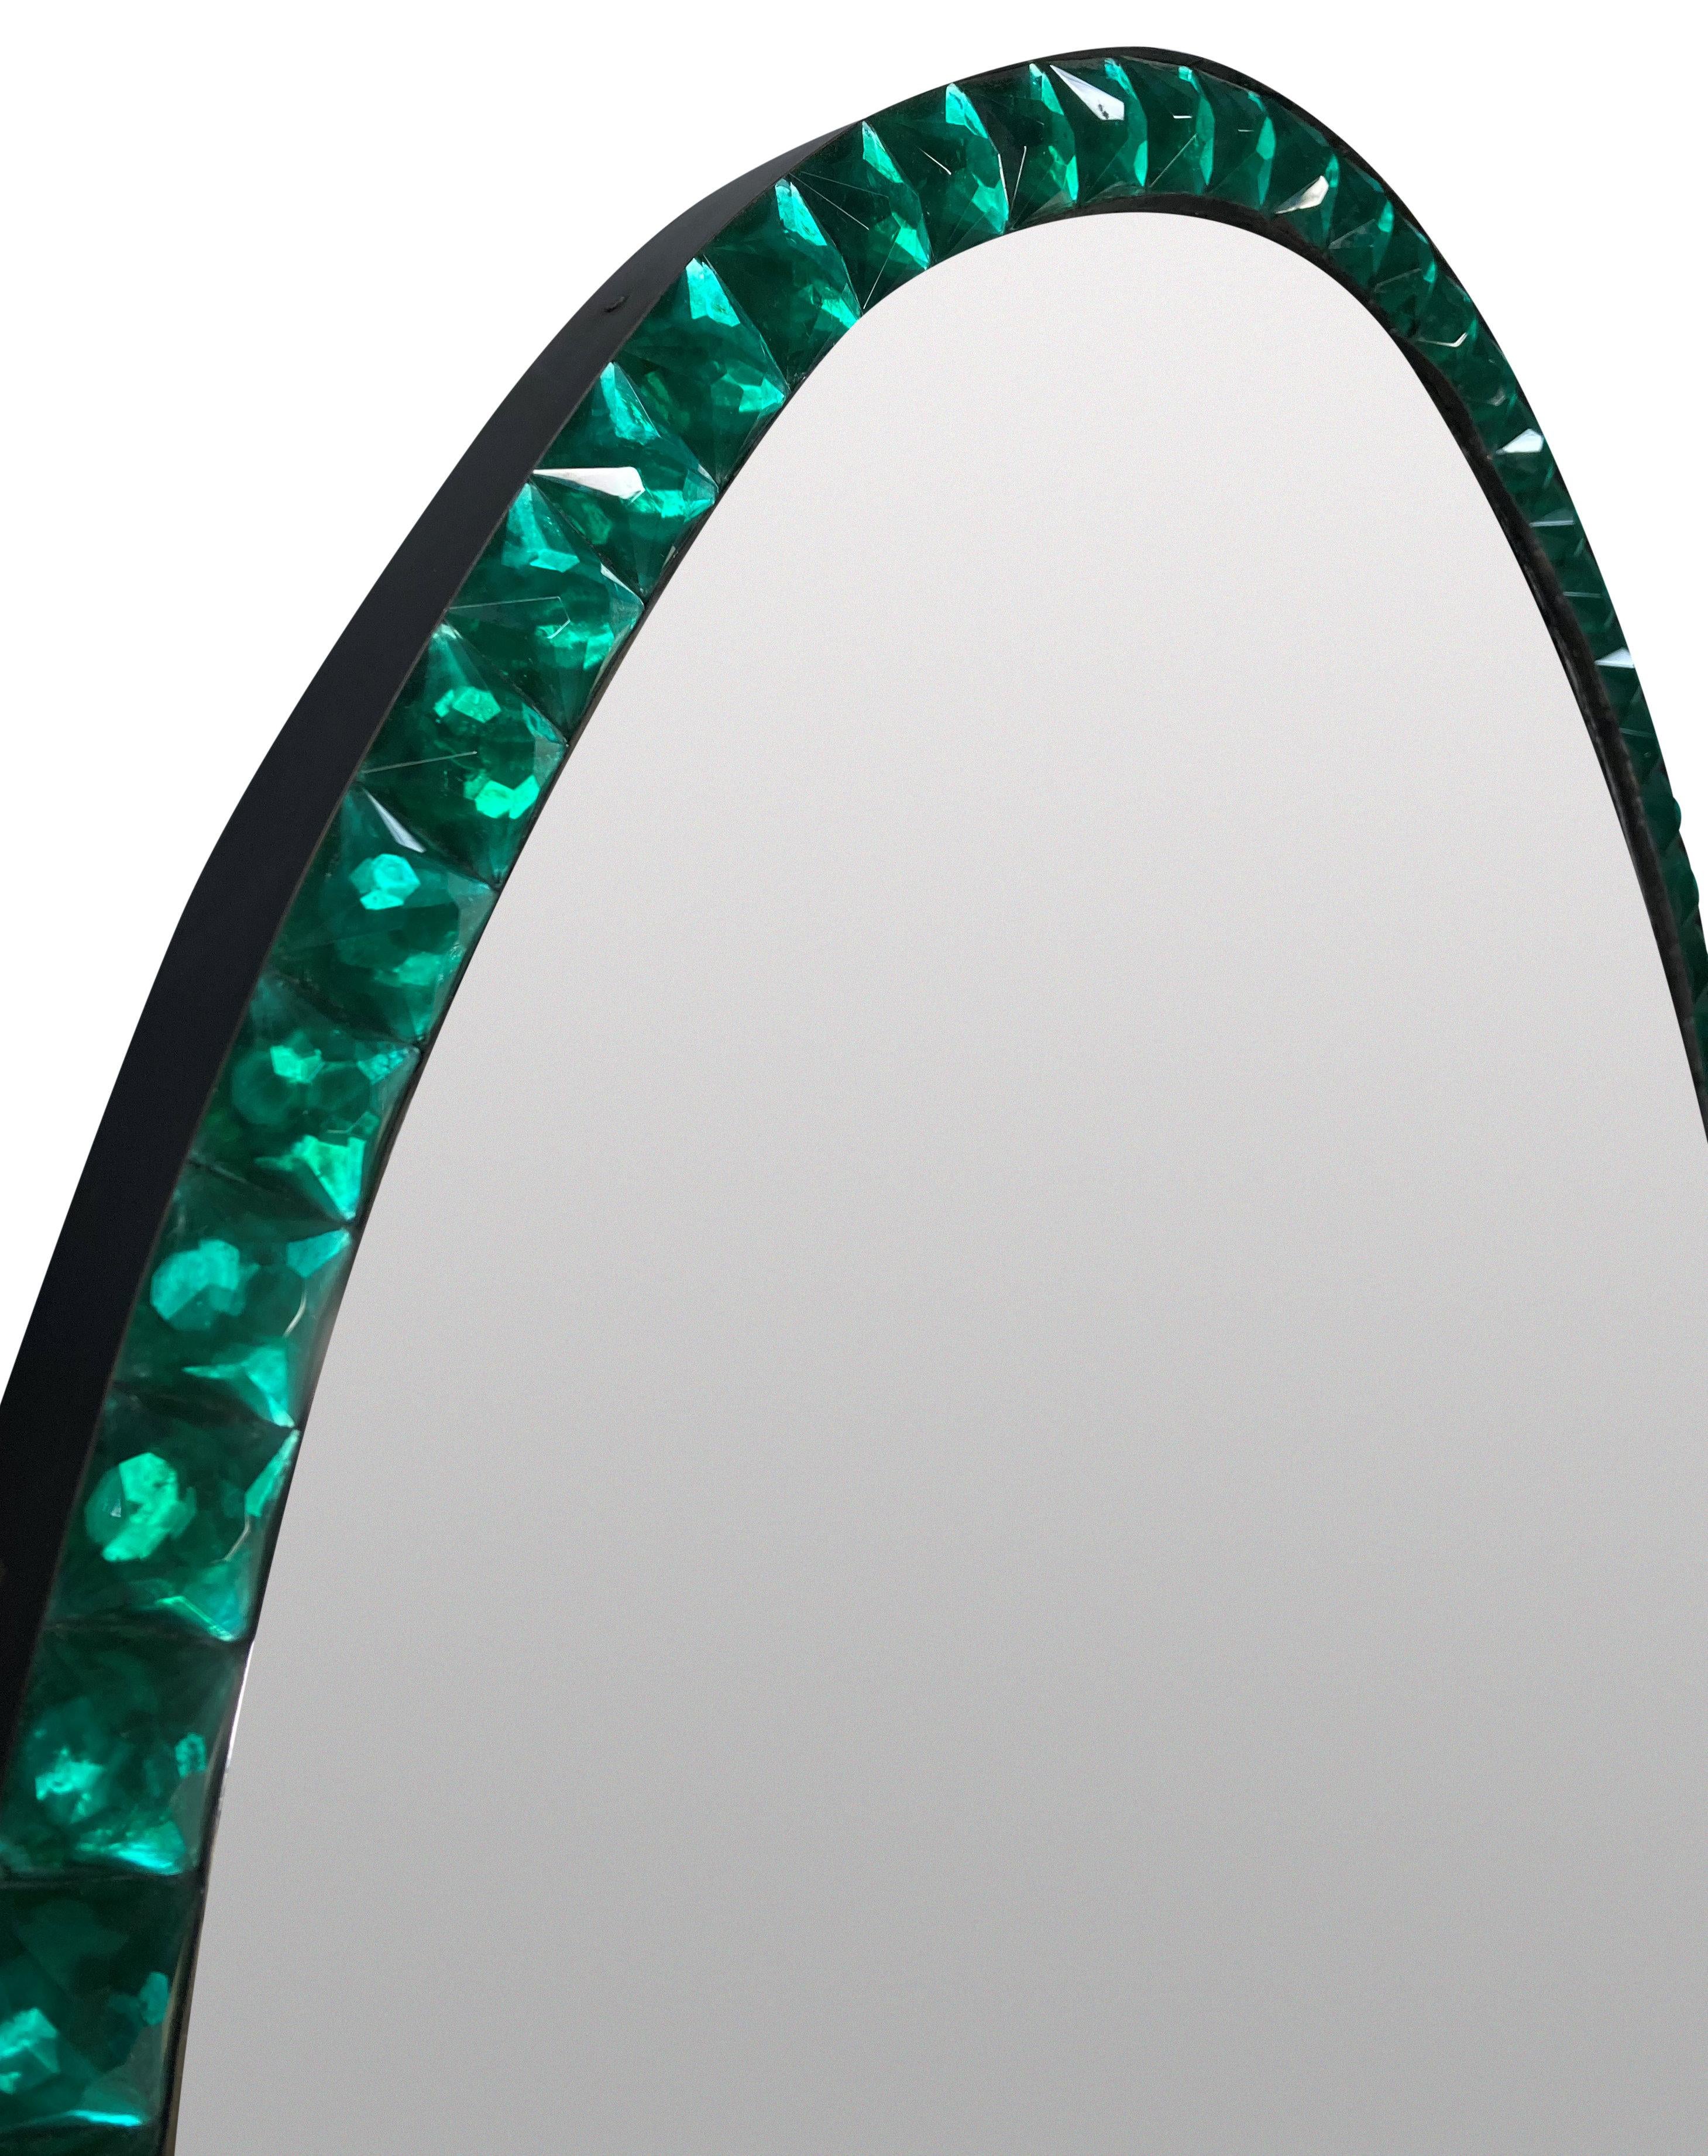 Late 20th Century Pair Of Georgian Style Irish Mirrors With Emerald Glass Faeted Borders